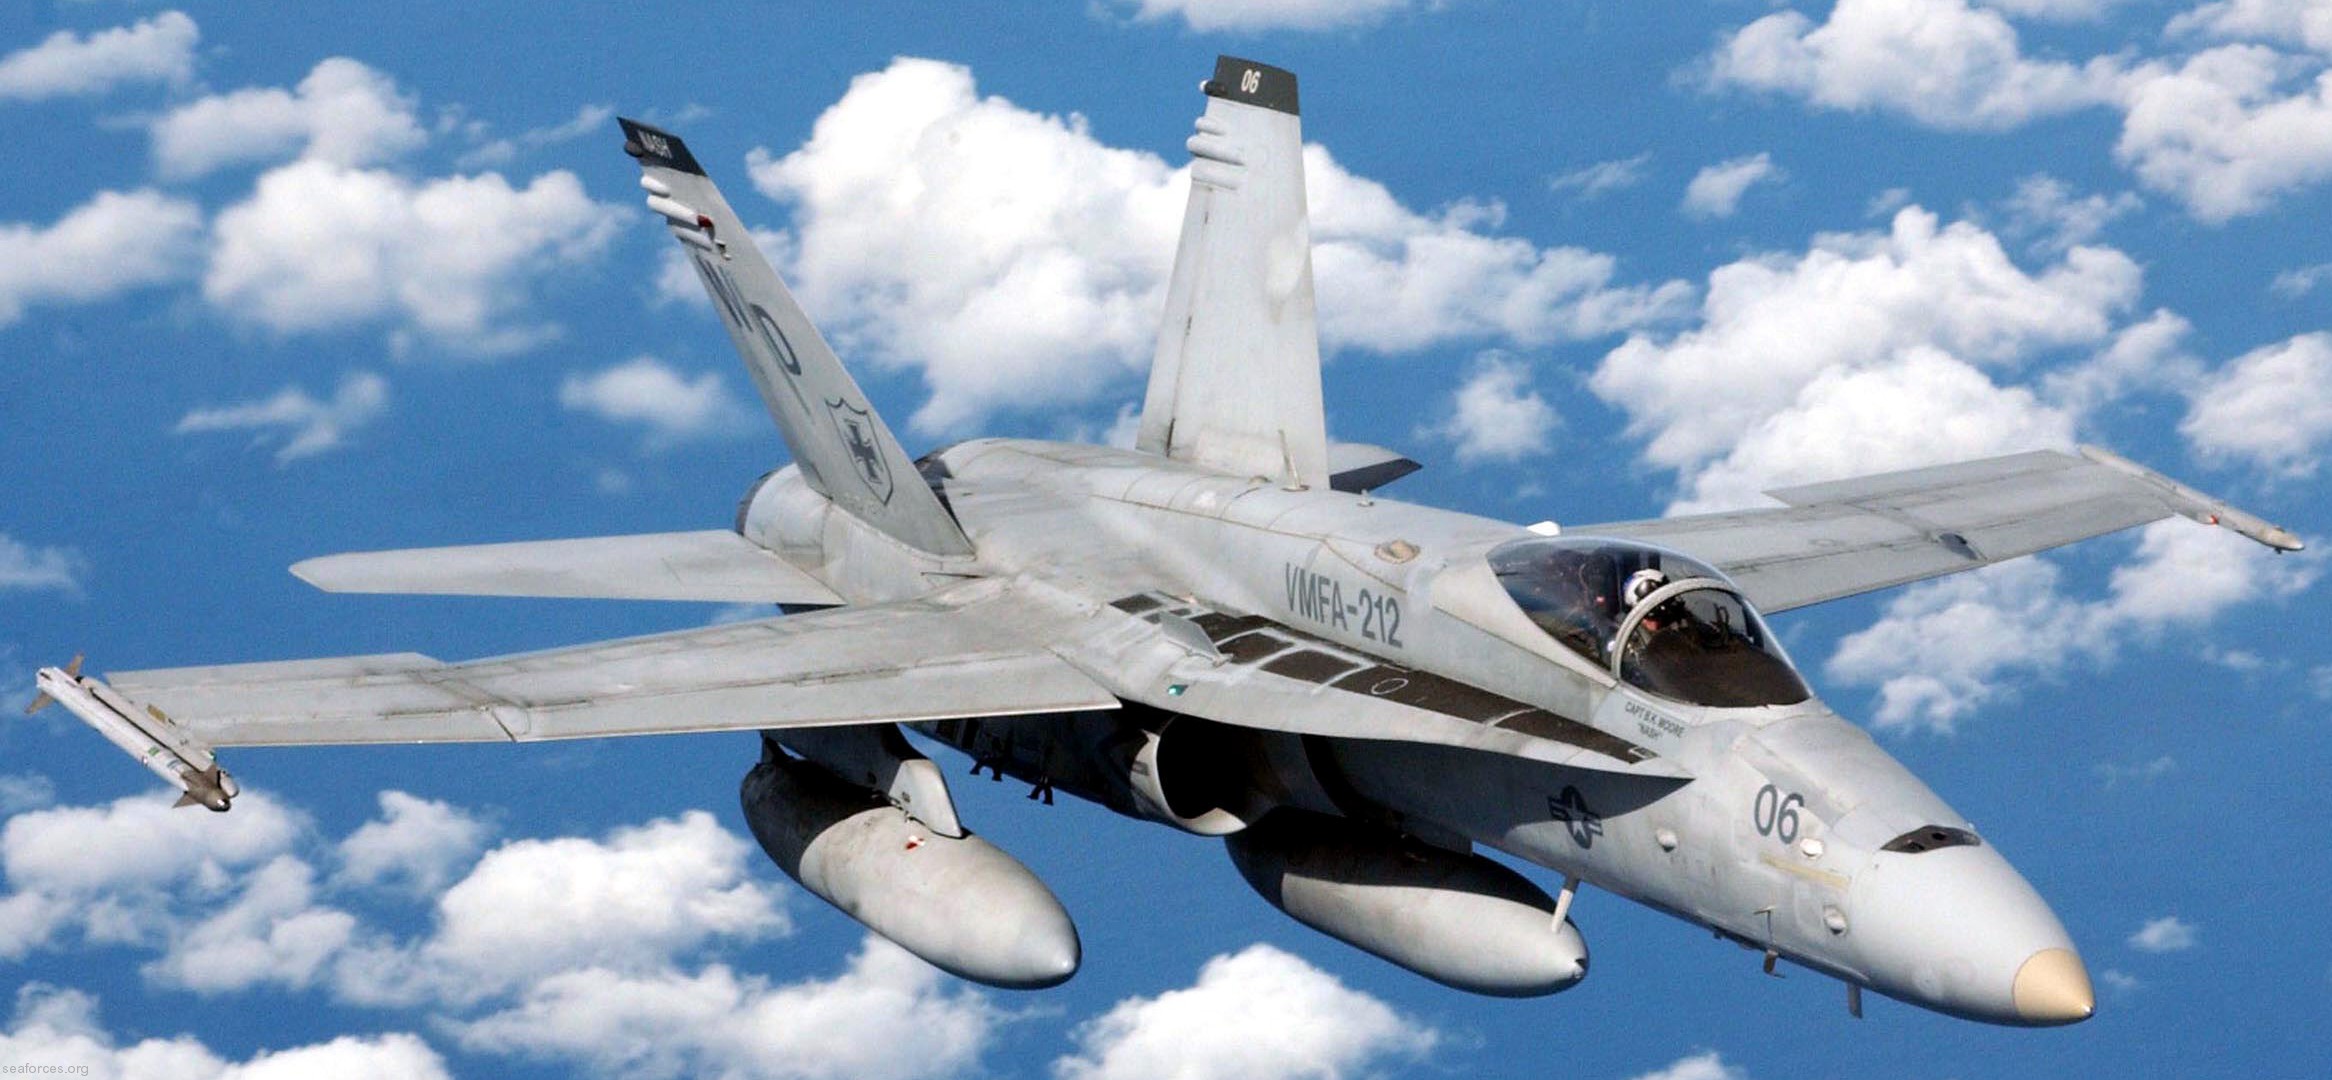 vmfa-212 lancers marine fighter attack sqaudron f/a-18 hornet 15x